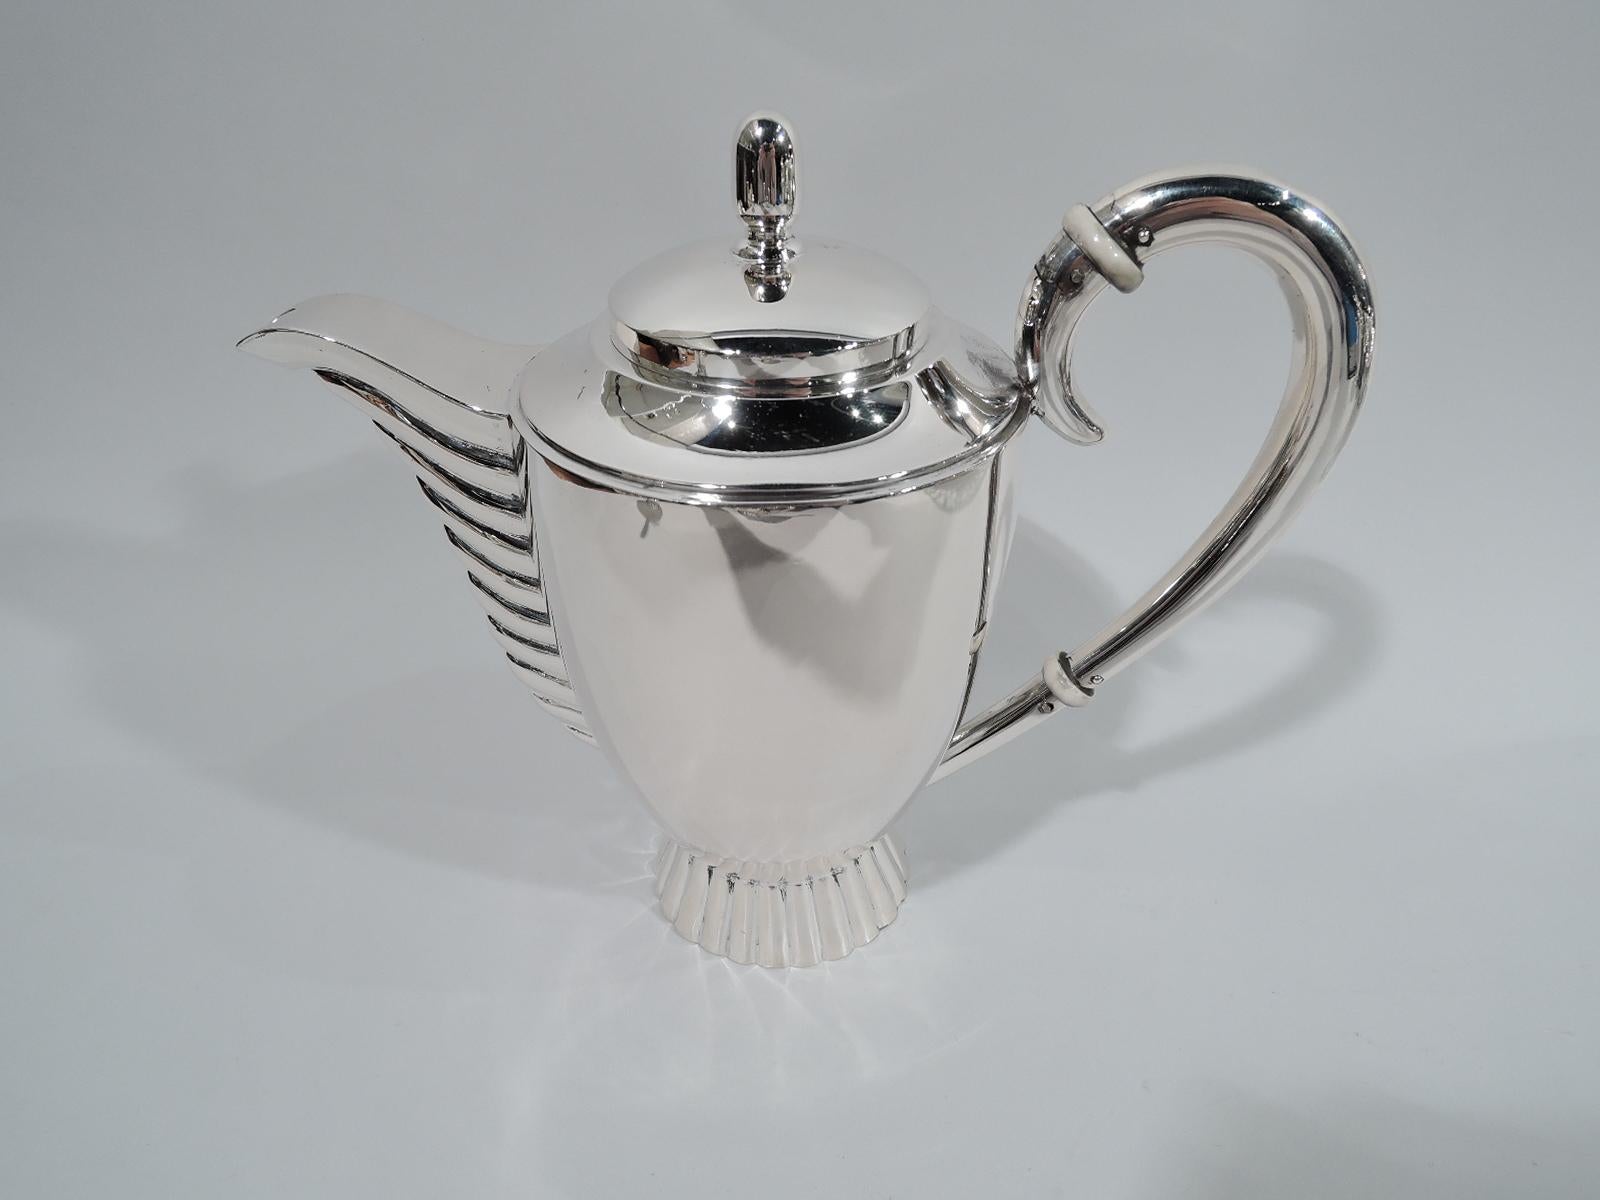 European Art Deco 835 silver 3-piece coffee set, circa 1925. This set comprises coffeepot, creamer, and sugar. Coffeepot: Ovoid body with high-looping handle, sinuous spout above graduated lobing, and side-hinged cover with stylized acorn finial;